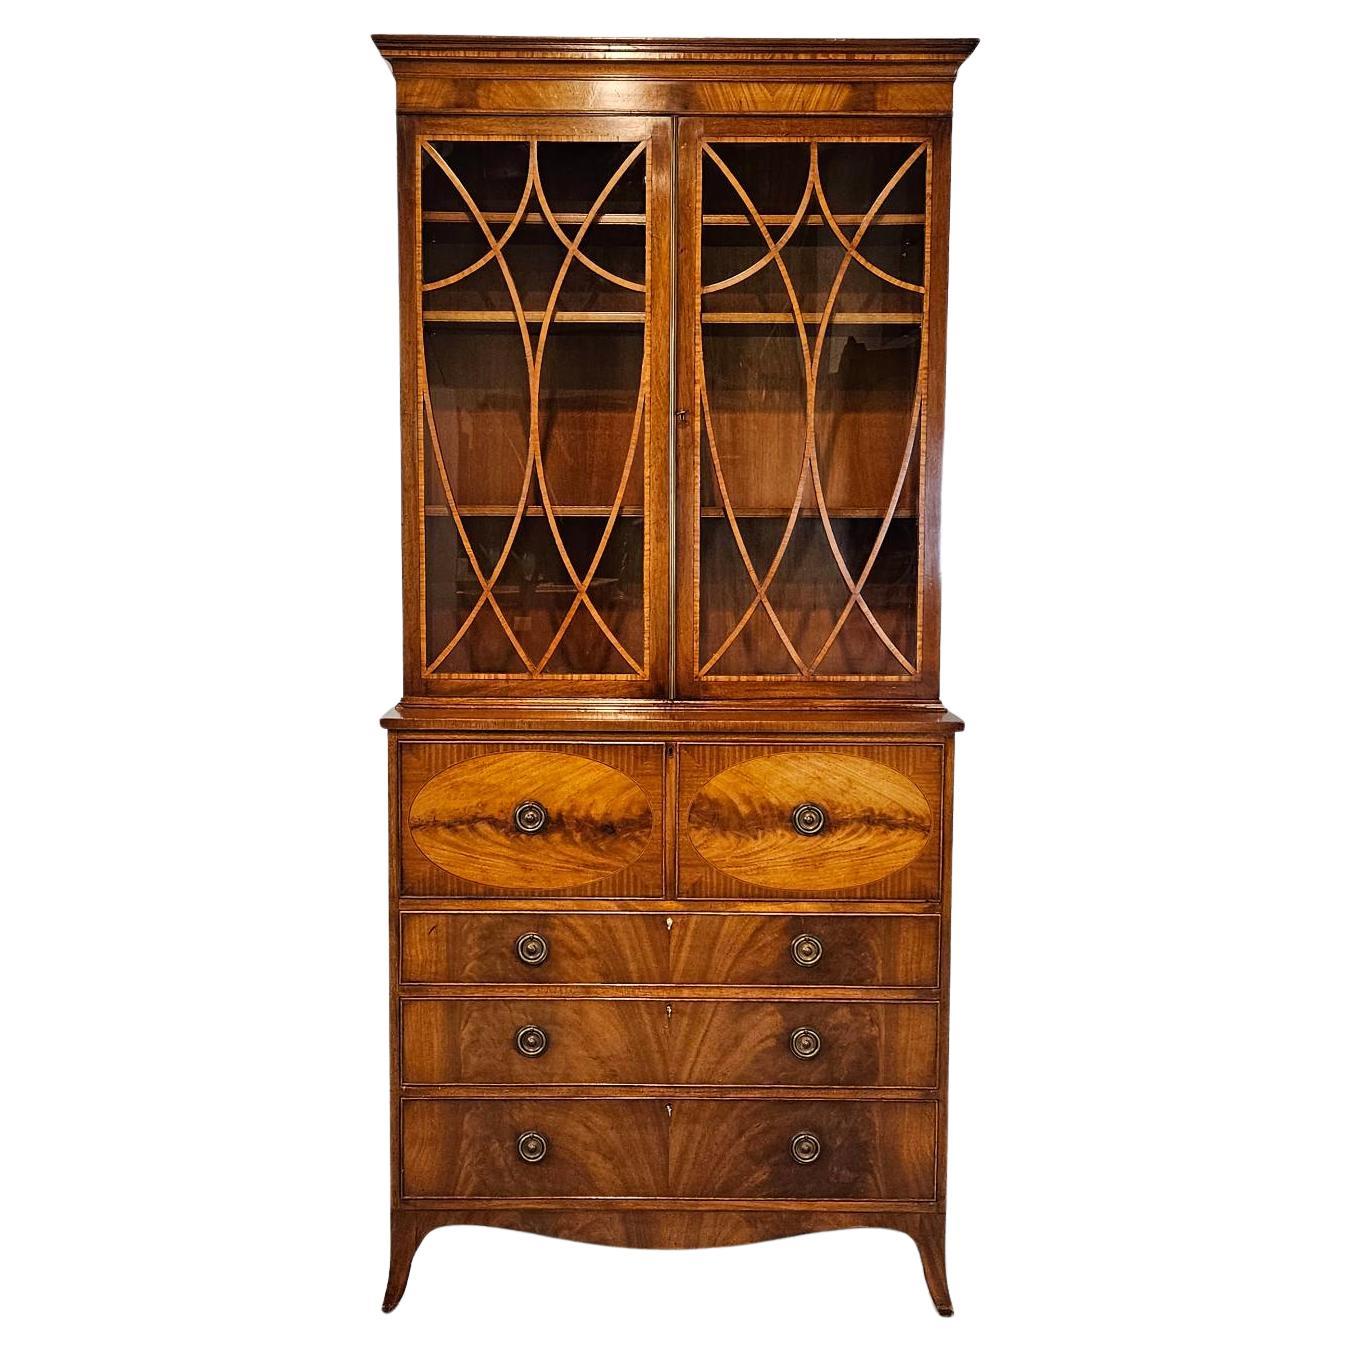 Georgian Style English Desk Bureau Bookcase with Banded Drawers, Leather Top